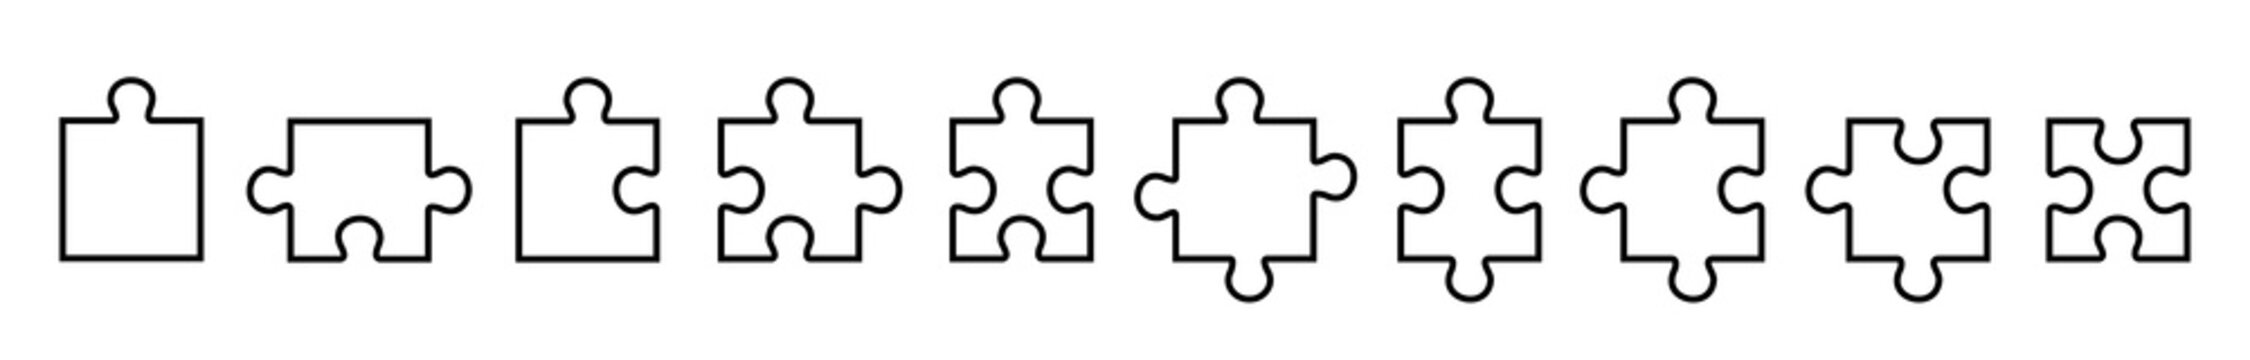 Set of puzzle pieces isolated on white background. Jigsaw puzzle with pieces. Vector design templates. Business presentation concept. Vector illustration.